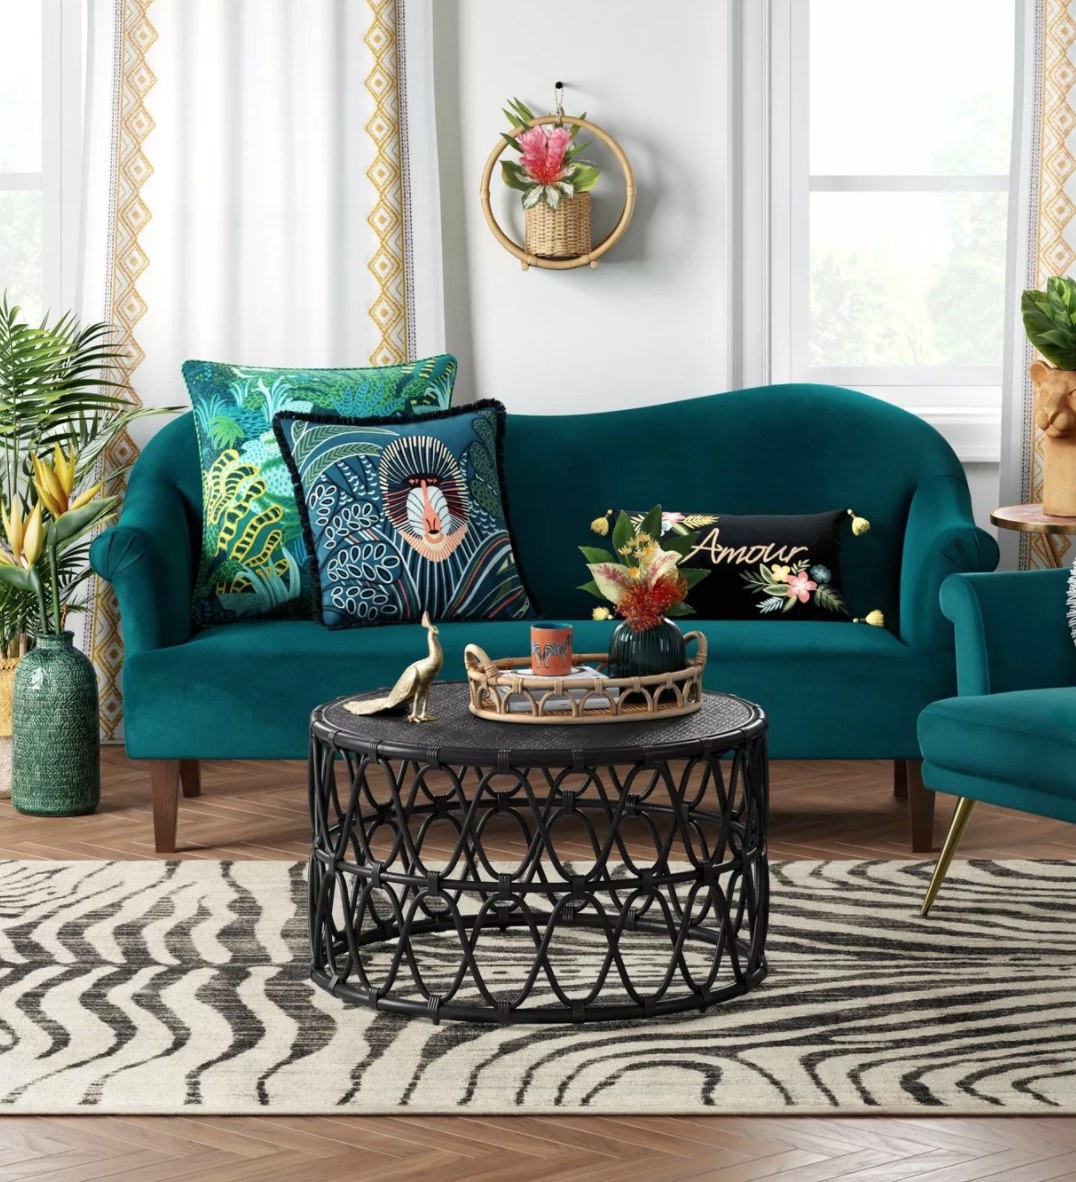 31 Splurge-Worthy Things From Target That Already Have An Impressive Amount Of 5-Star Reviews